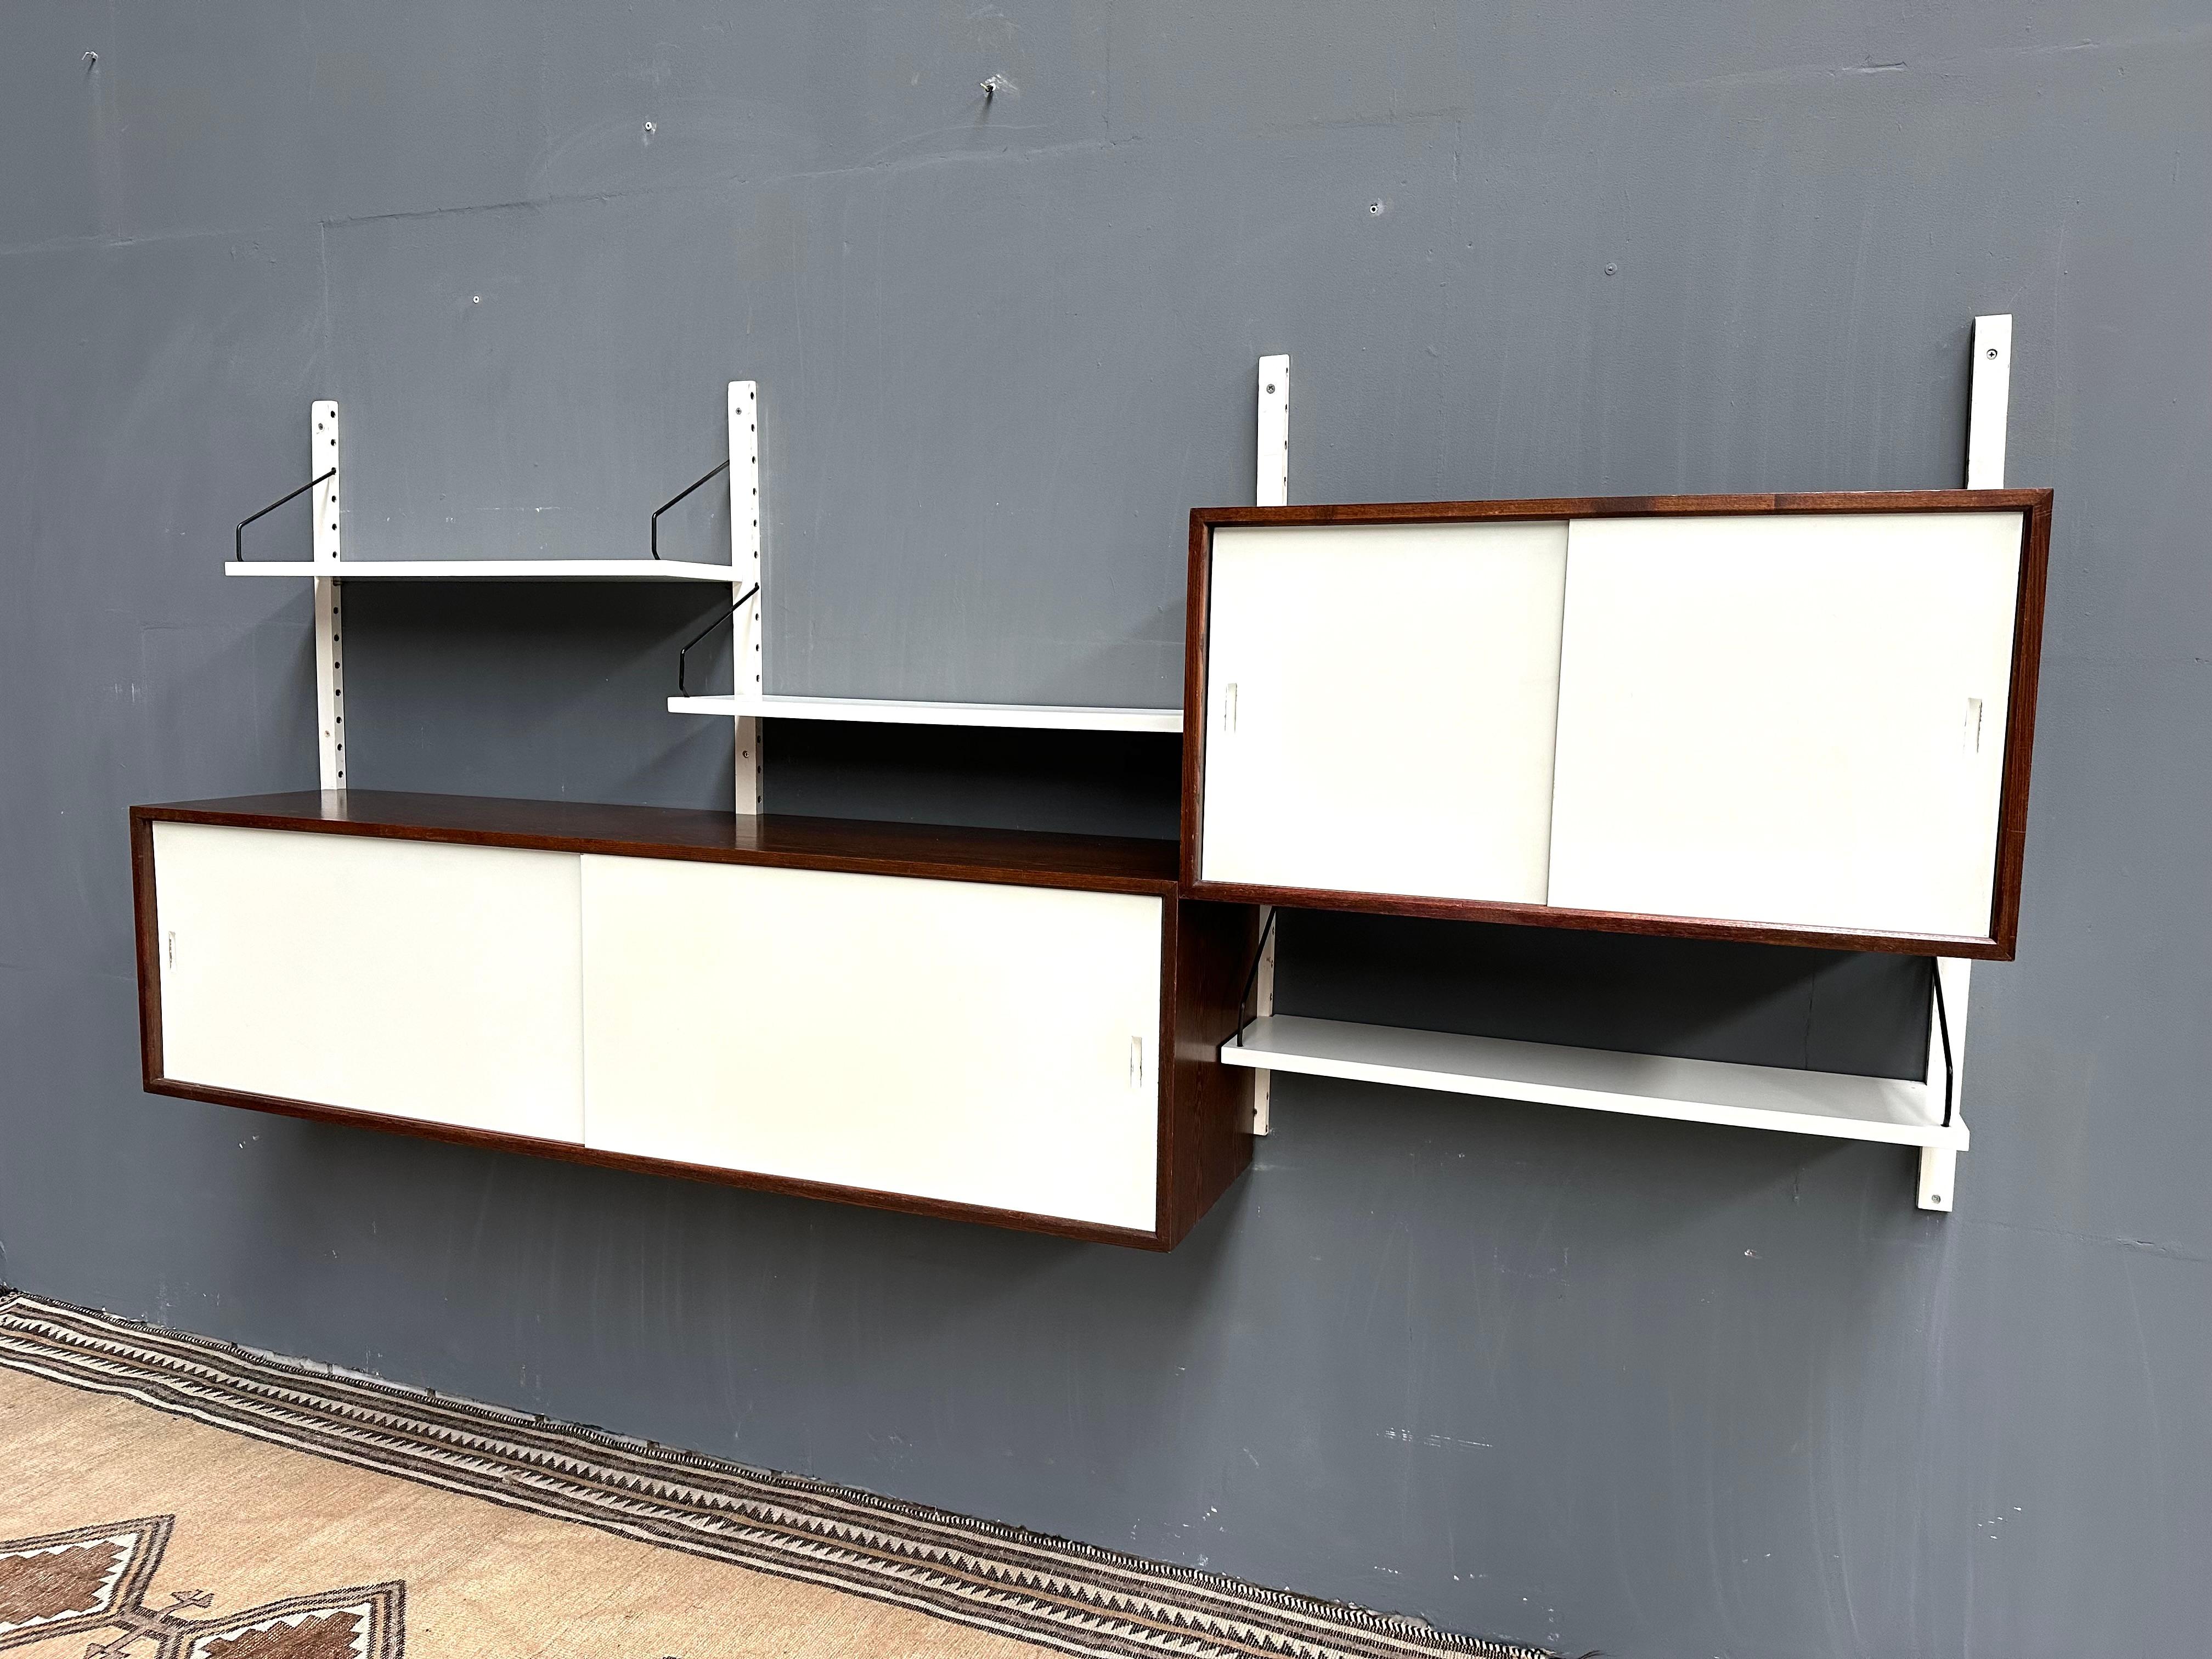 Modular Royal System wall unit  in wenge and white. Designed by Poul Cadovius in the Sixties. Manufactured by CADO in Denmark. The individual elements of the wall system are made of wenge veneer and white lacquered shelves and doors. The uprights